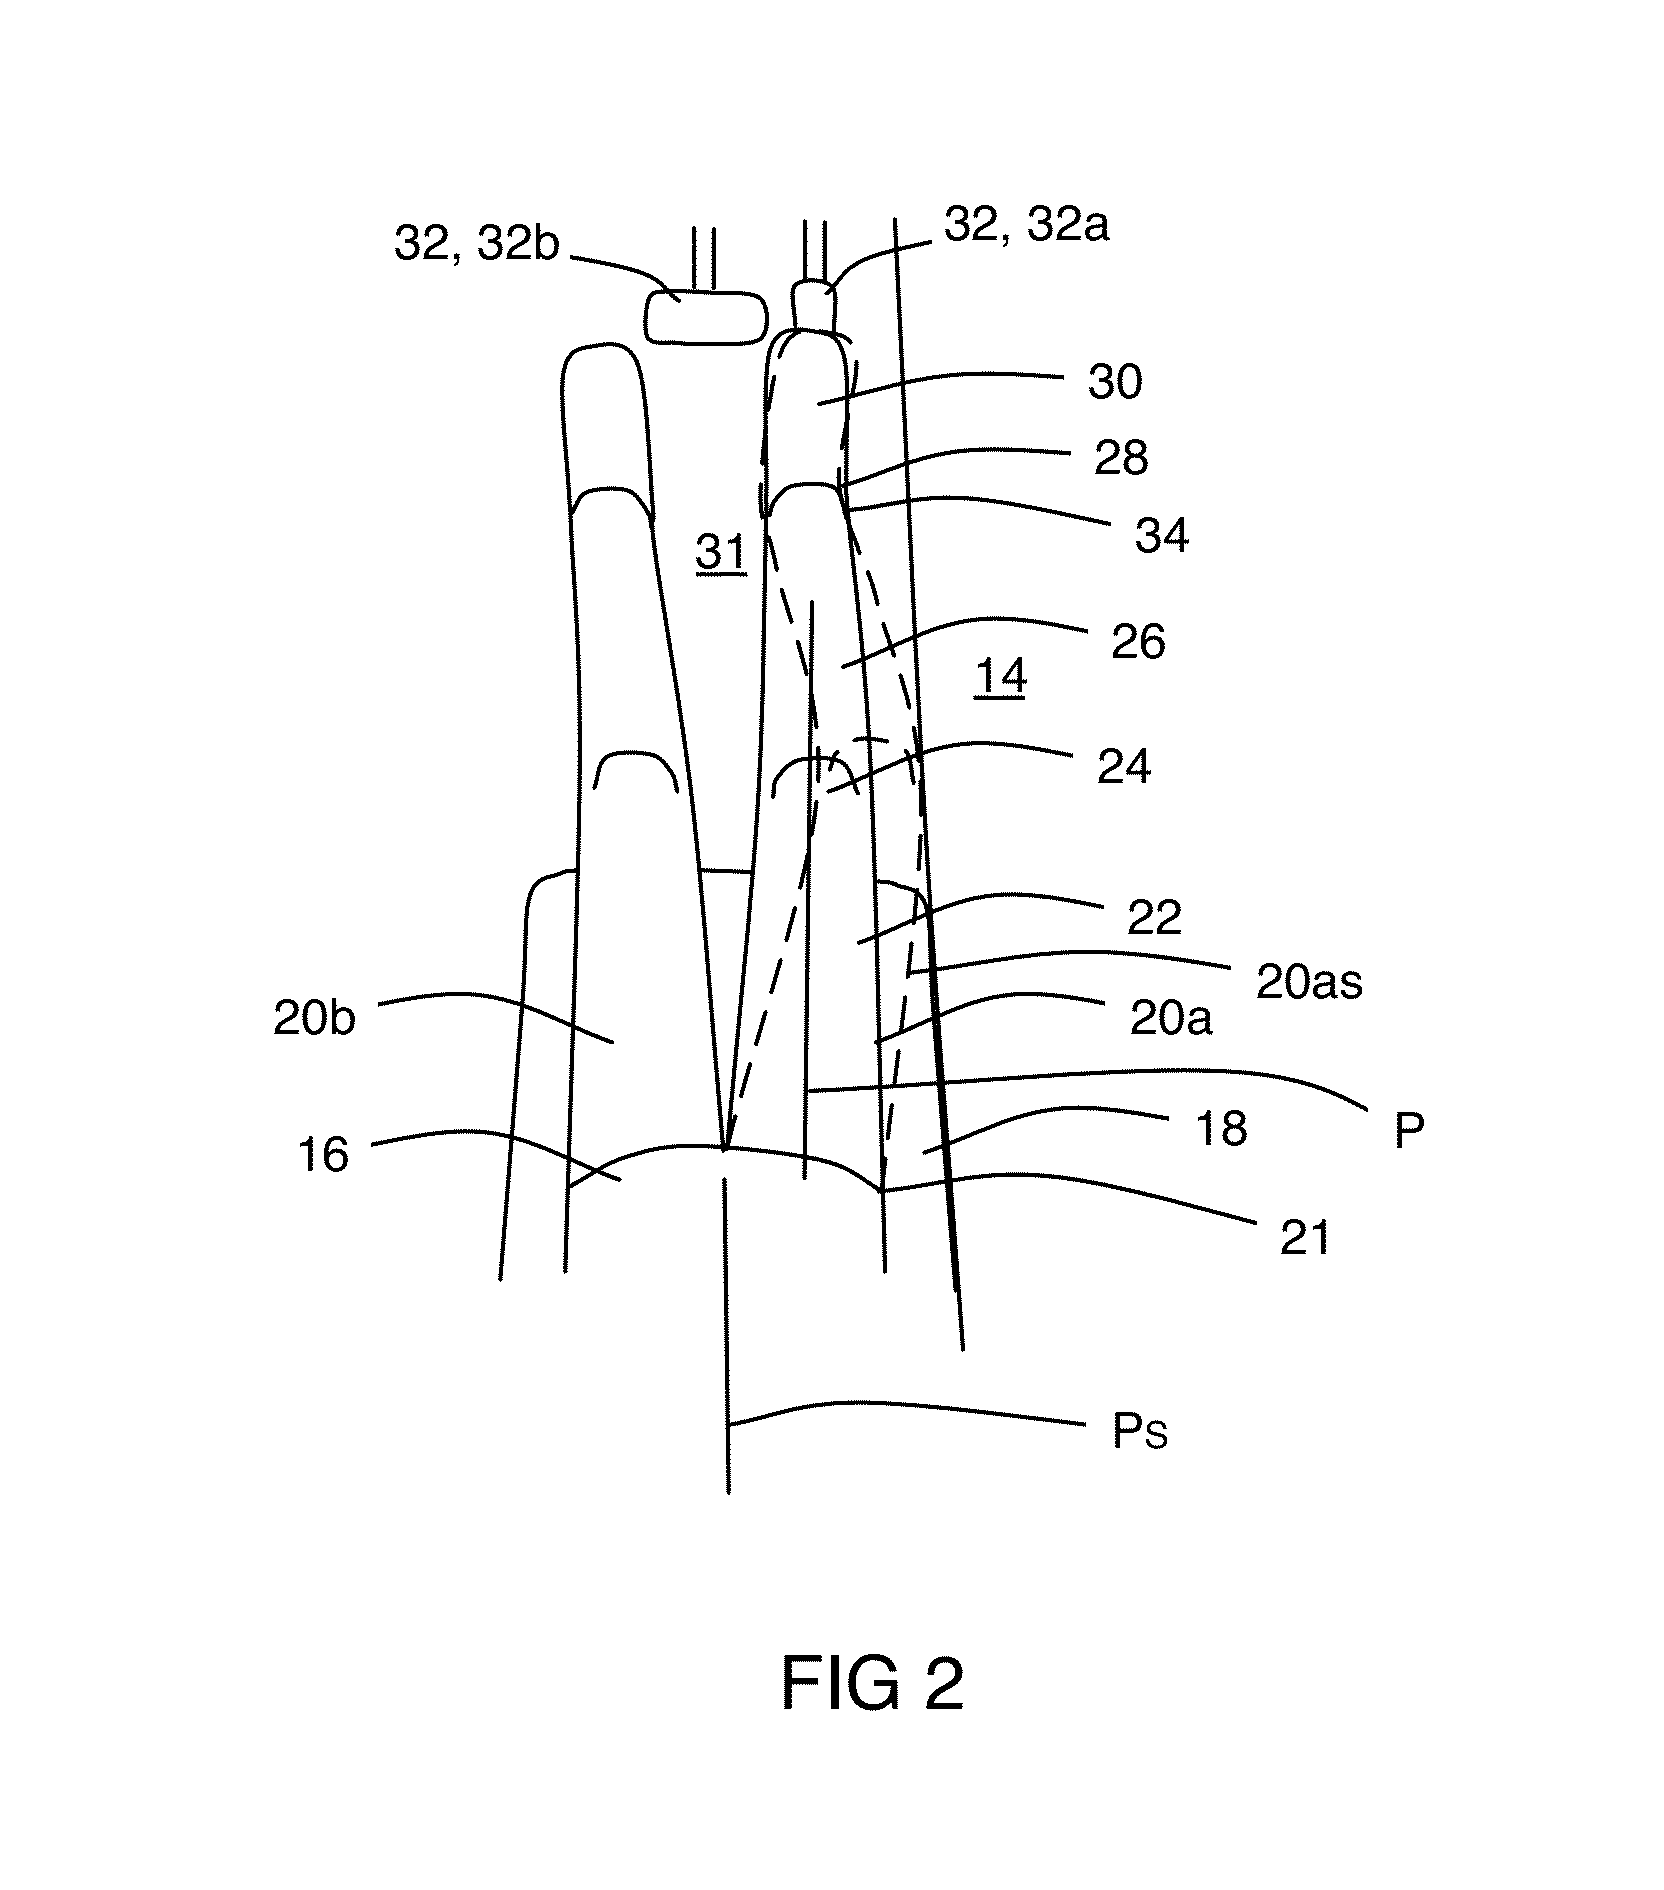 Leg support for vehicle occupant